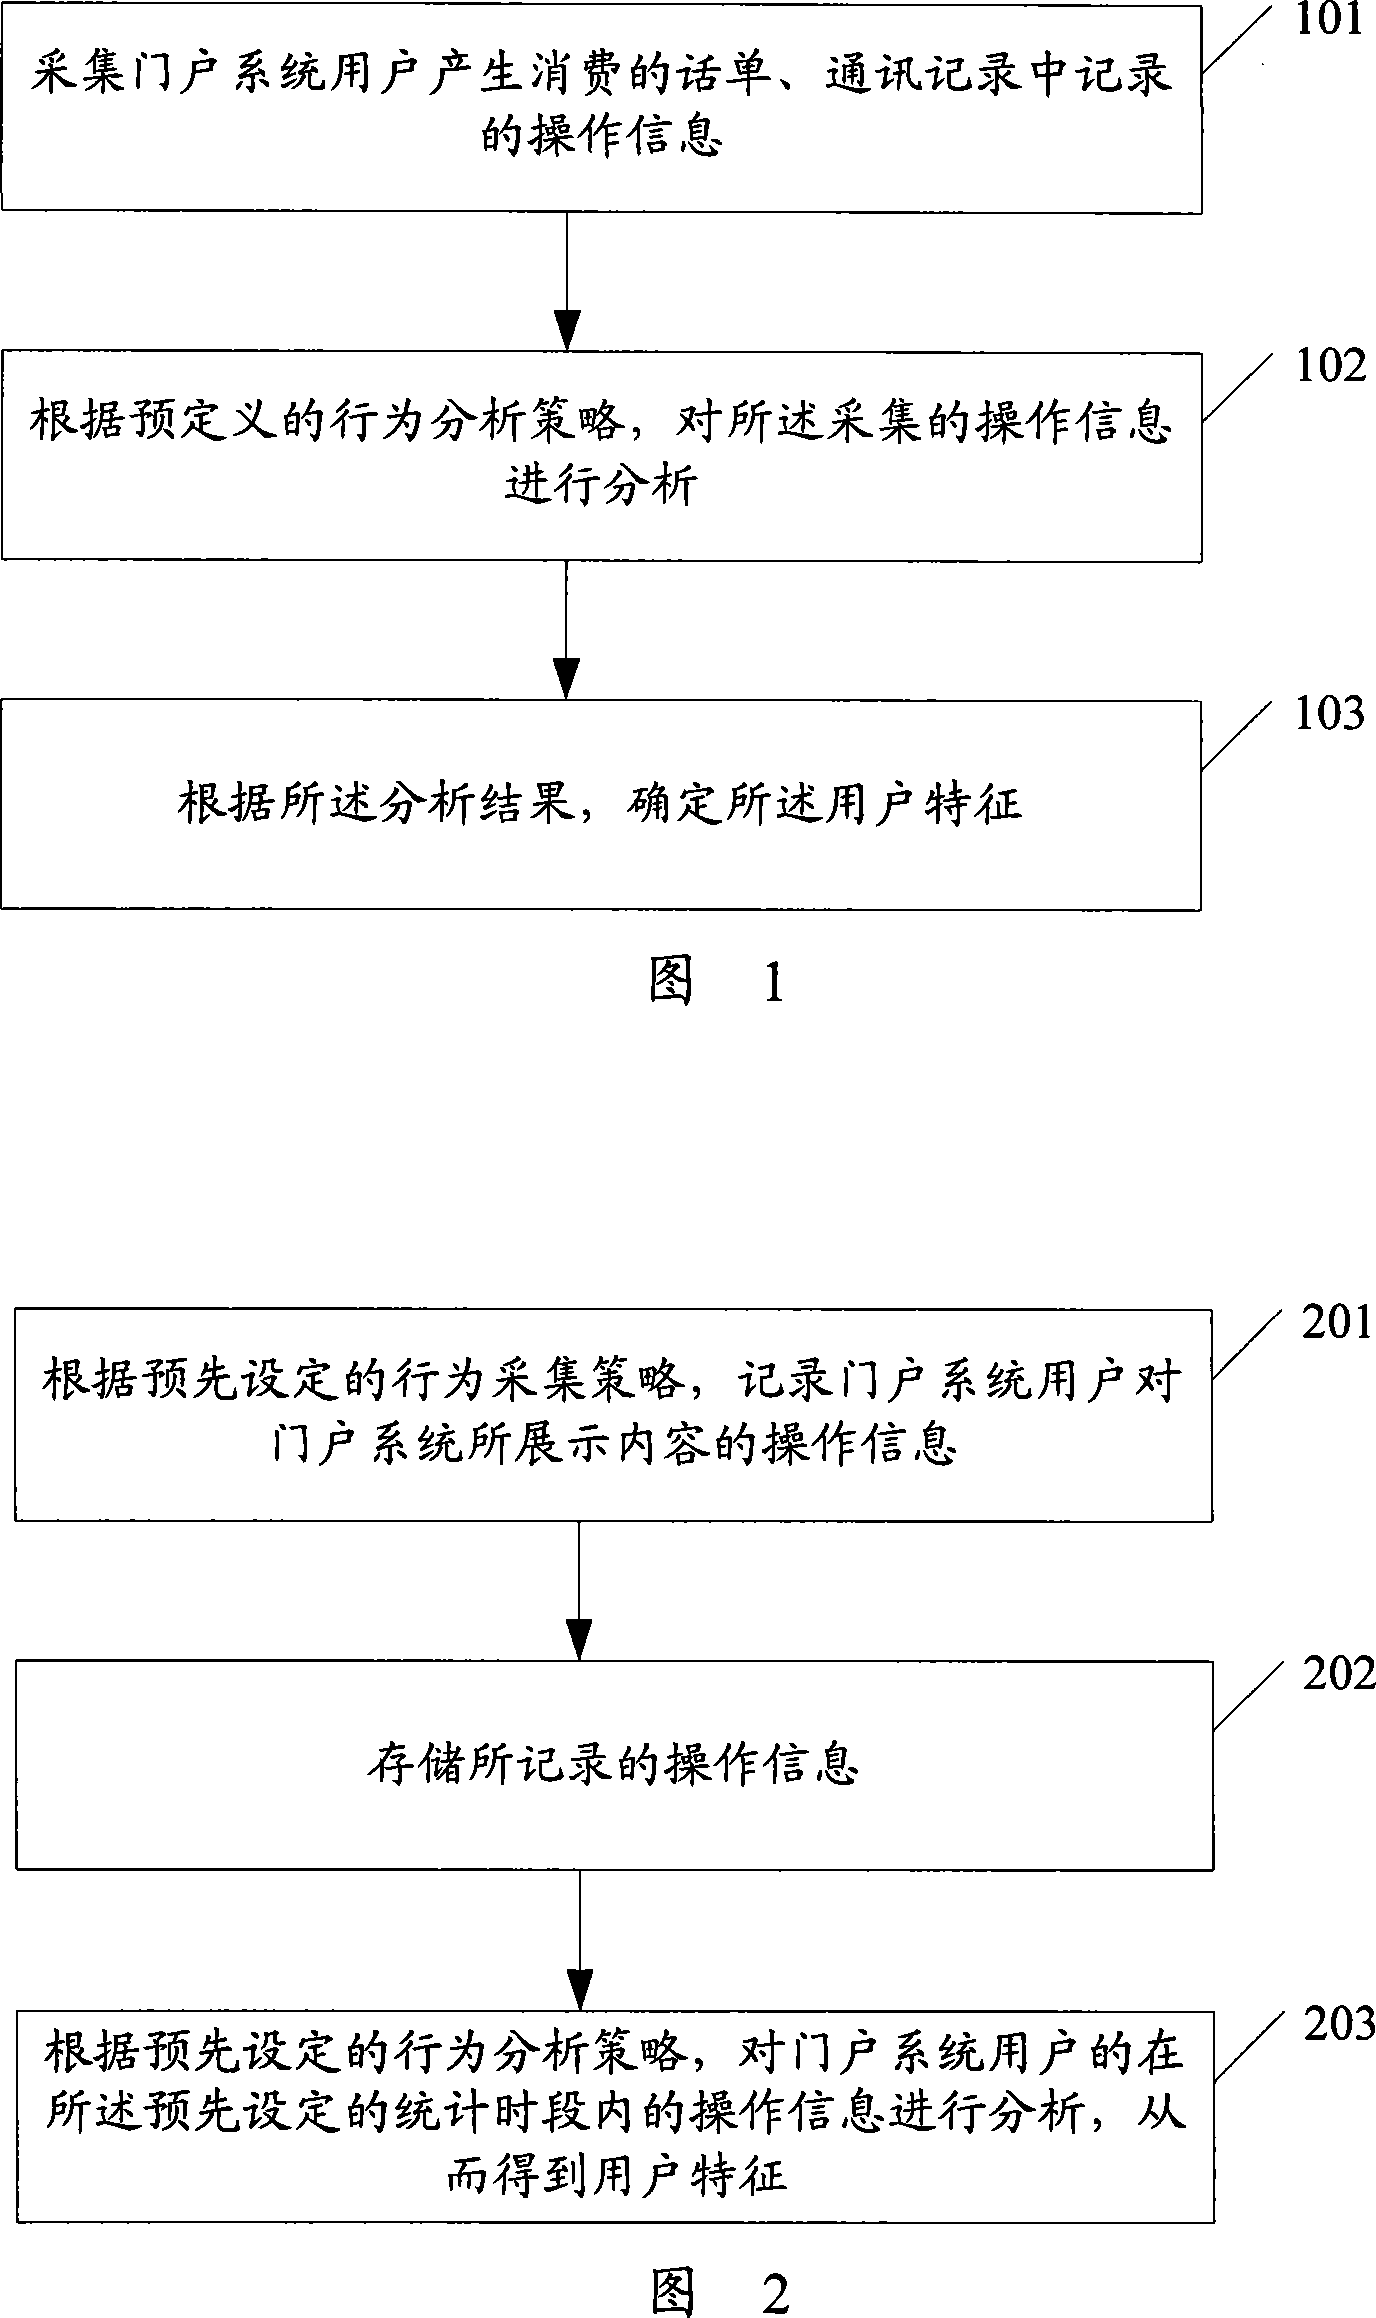 A behavior collection and analysis method and system